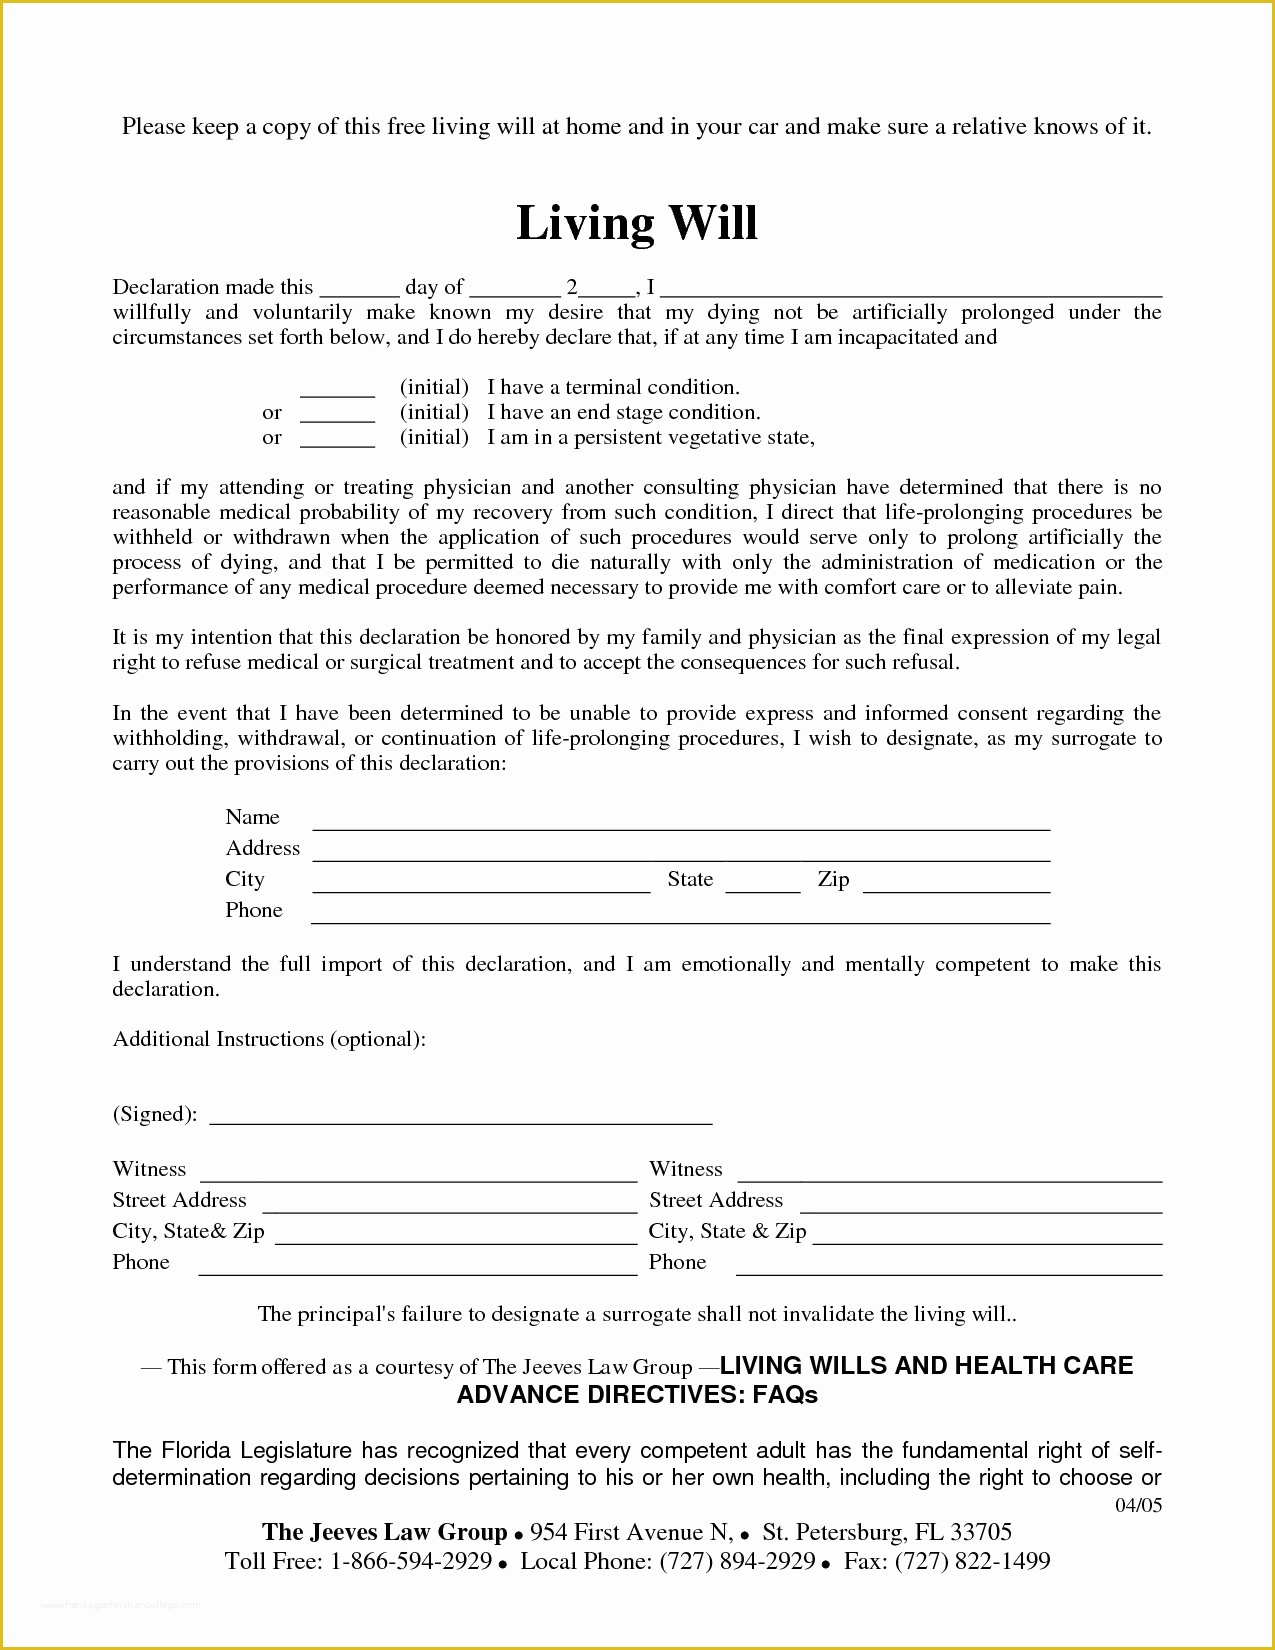 Simple Will Template Free Of Free Copy Of Living Will by Richard Cataman Living Will